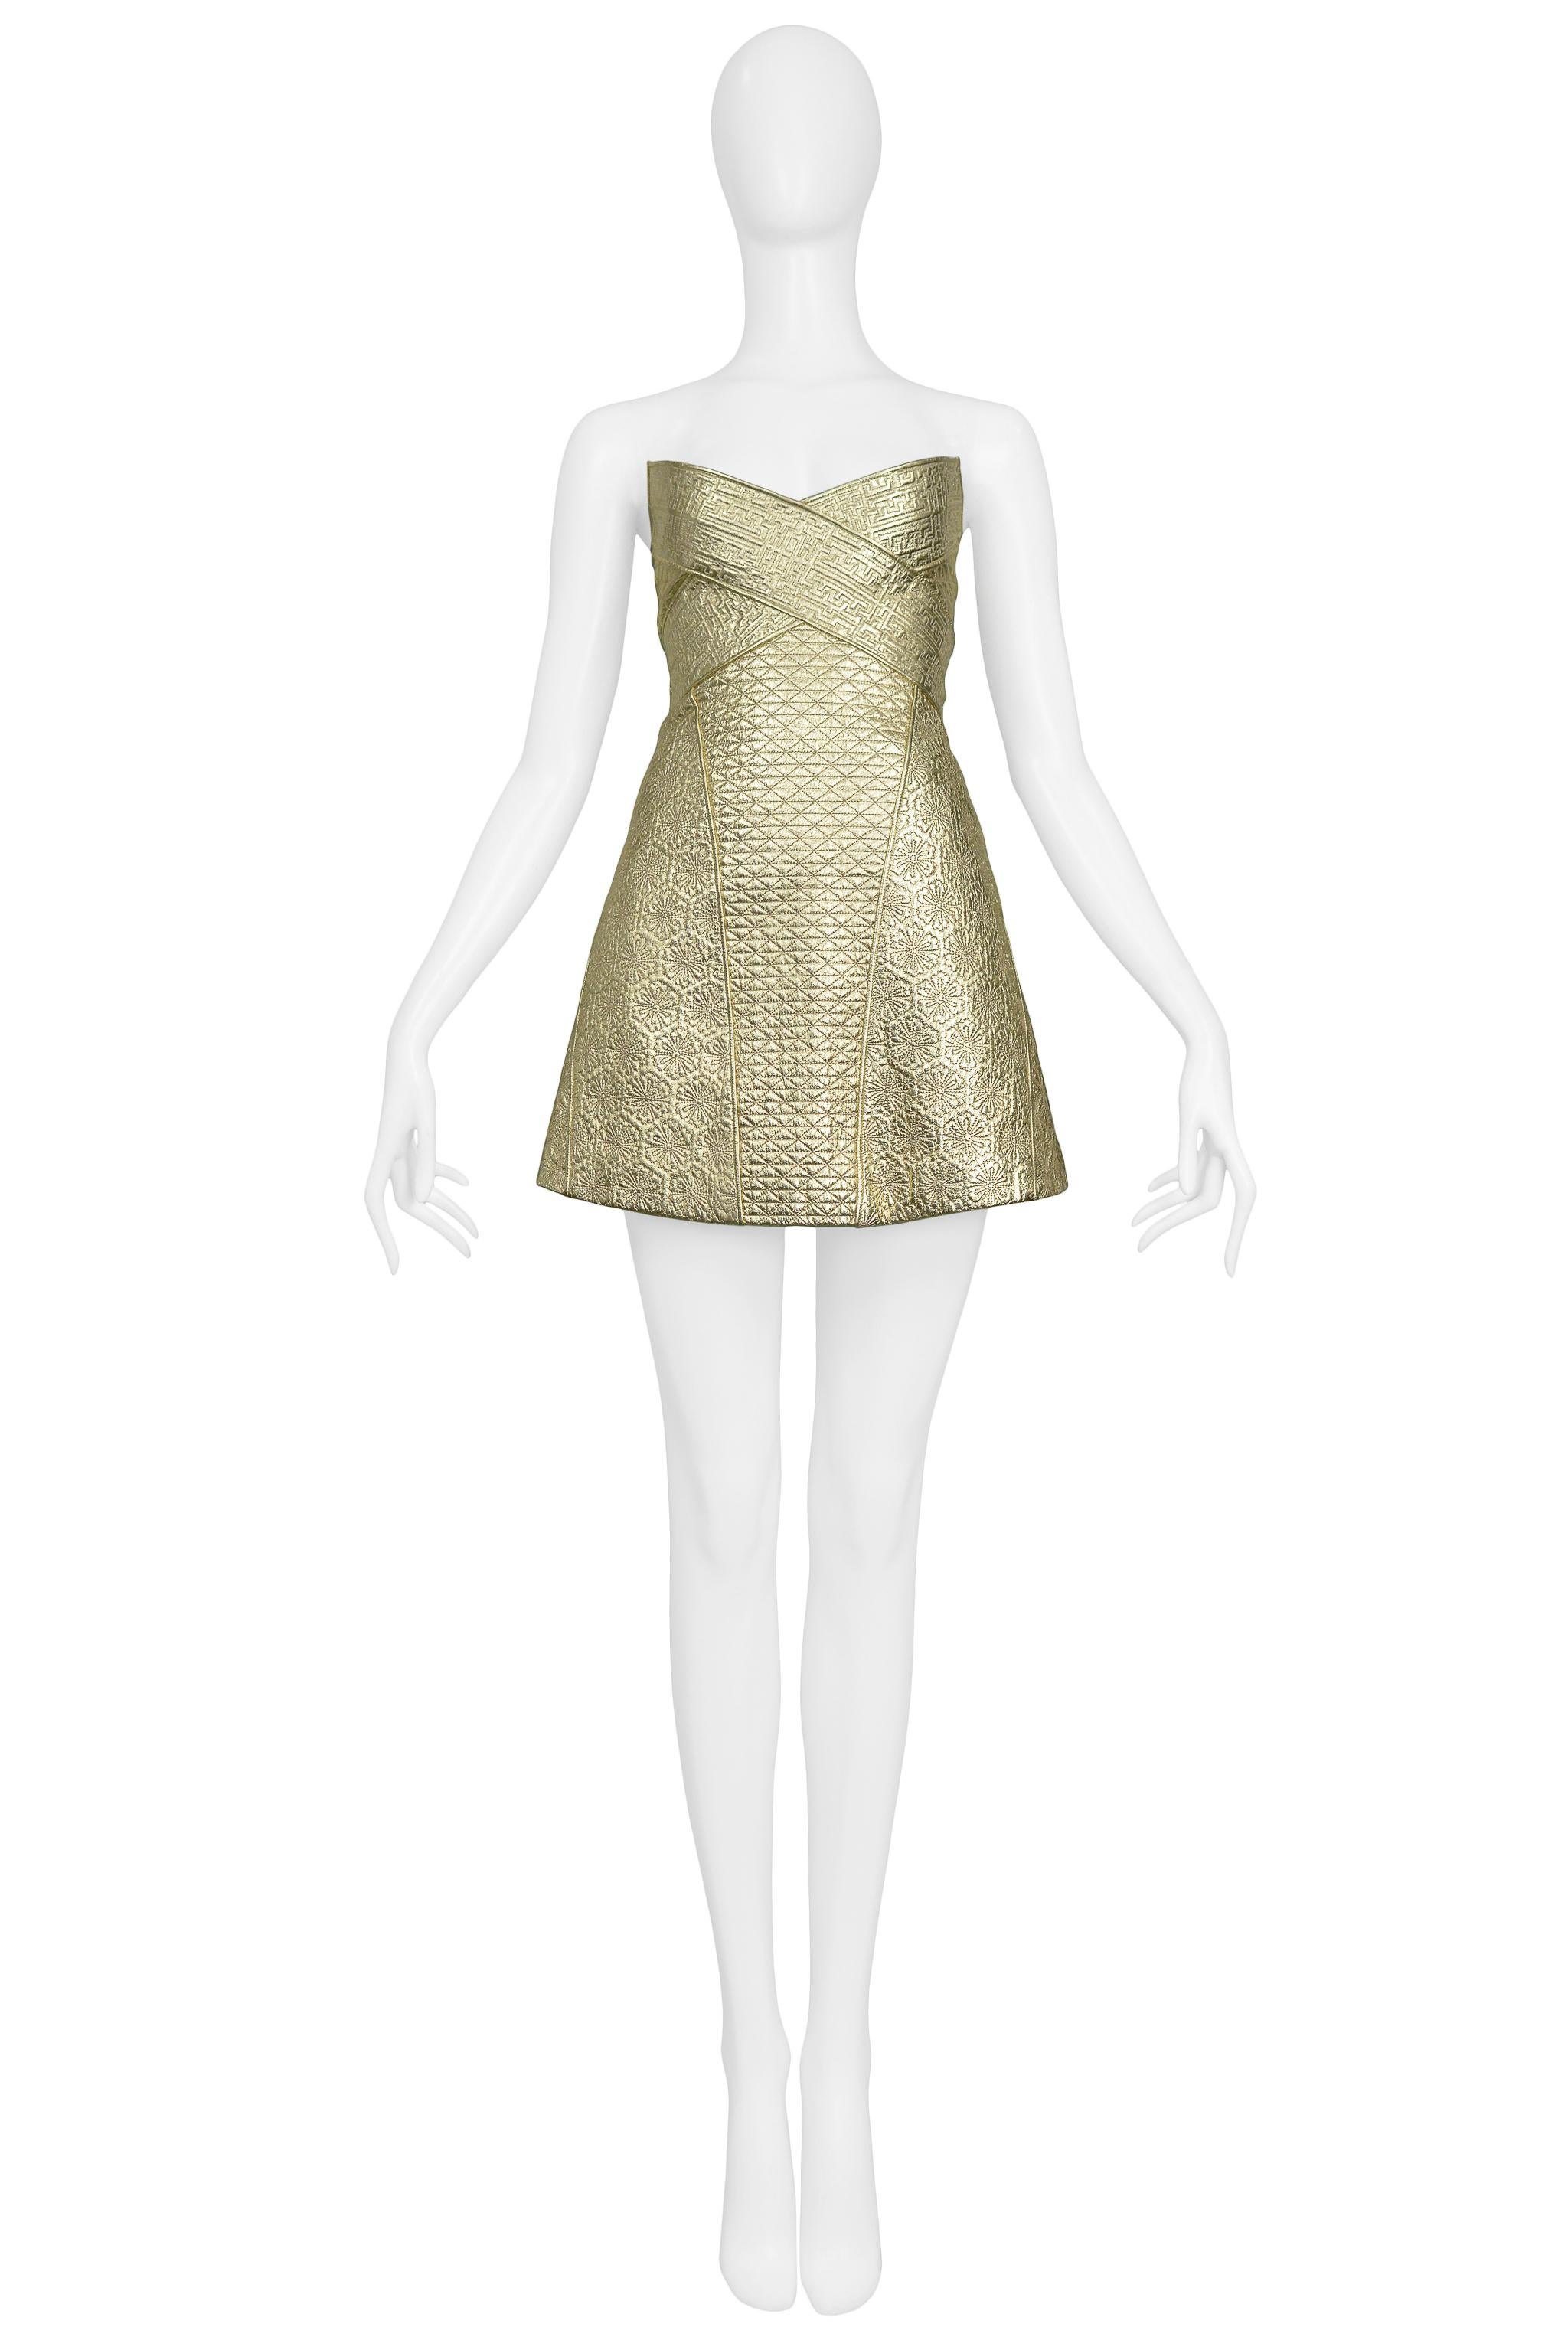 Resurrection is excited to offer a vintage Alexander McQueen gold leather armor dress featuring contrasting quilted and embossed designs, a strapless v front, a-line skirt, and center back zipper. 

Alexander McQueen 
Size 42
100% Leather - 100%